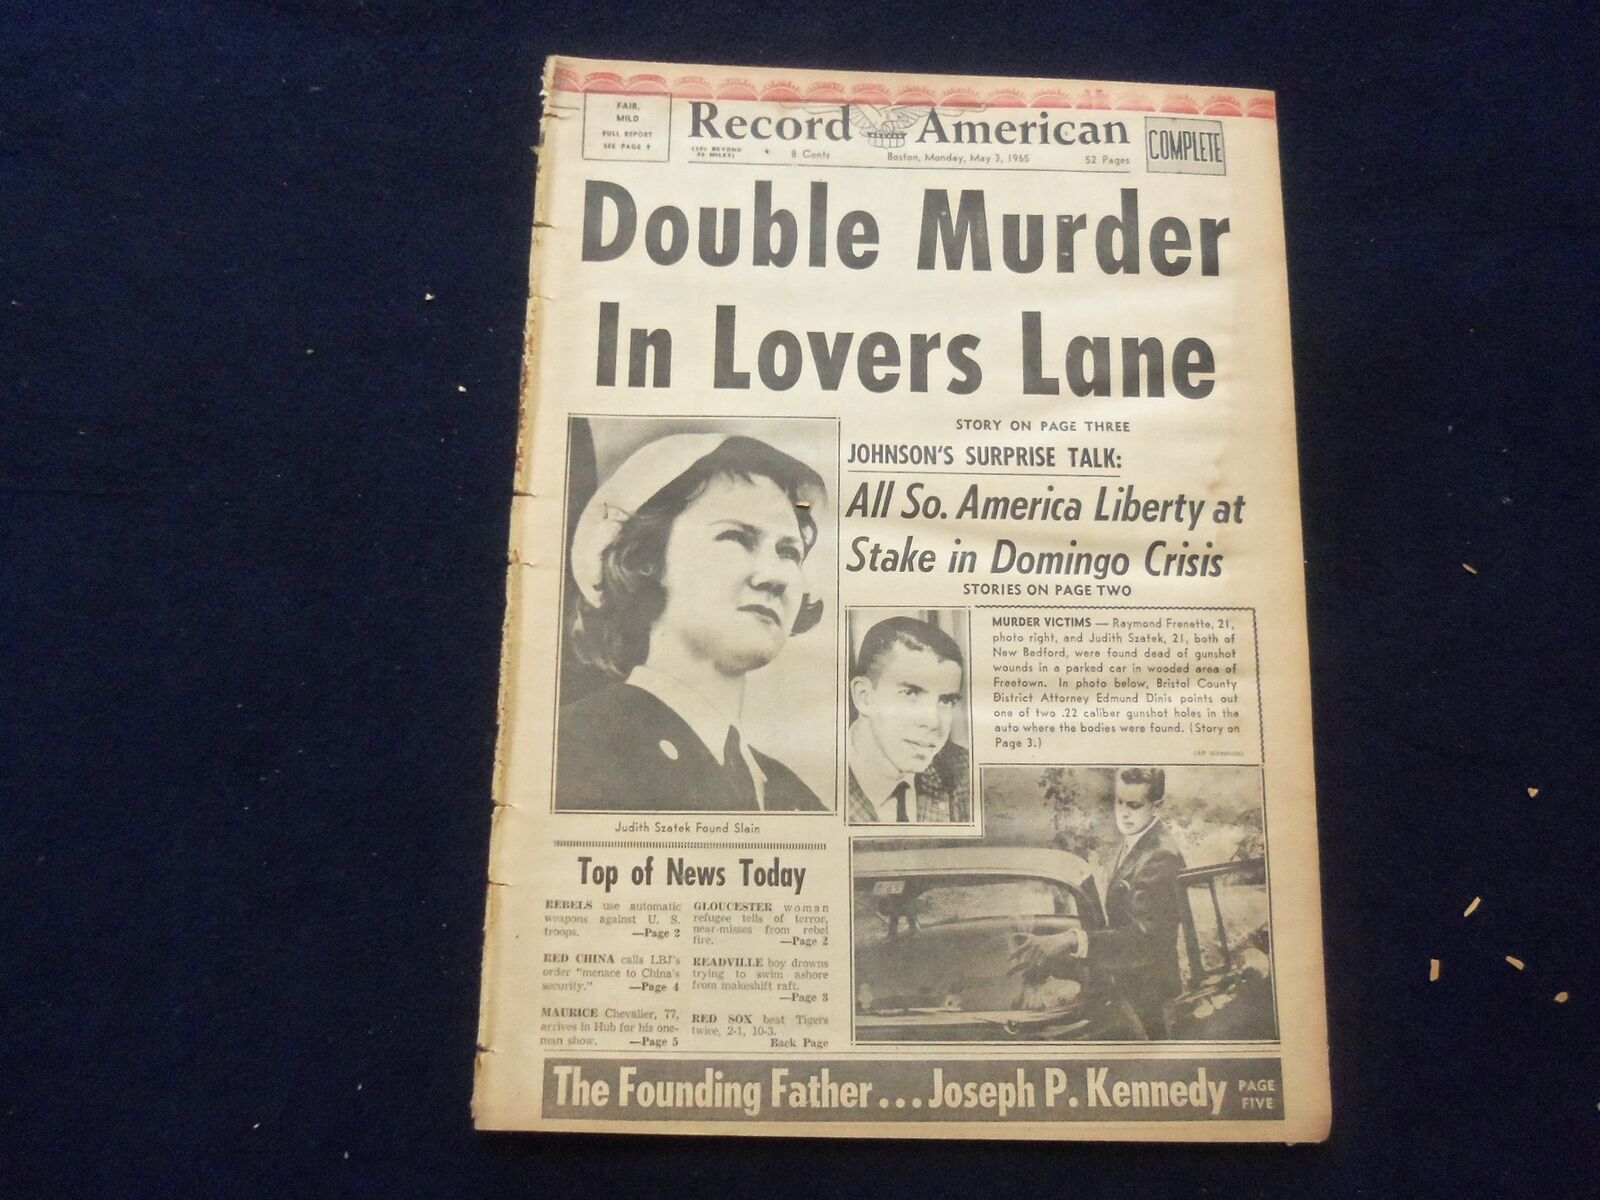 1965 MAY 3 BOSTON RECORD AMERICAN NEWSPAPER DOUBLE MURDER IN LOVERS LANE-NP 6280